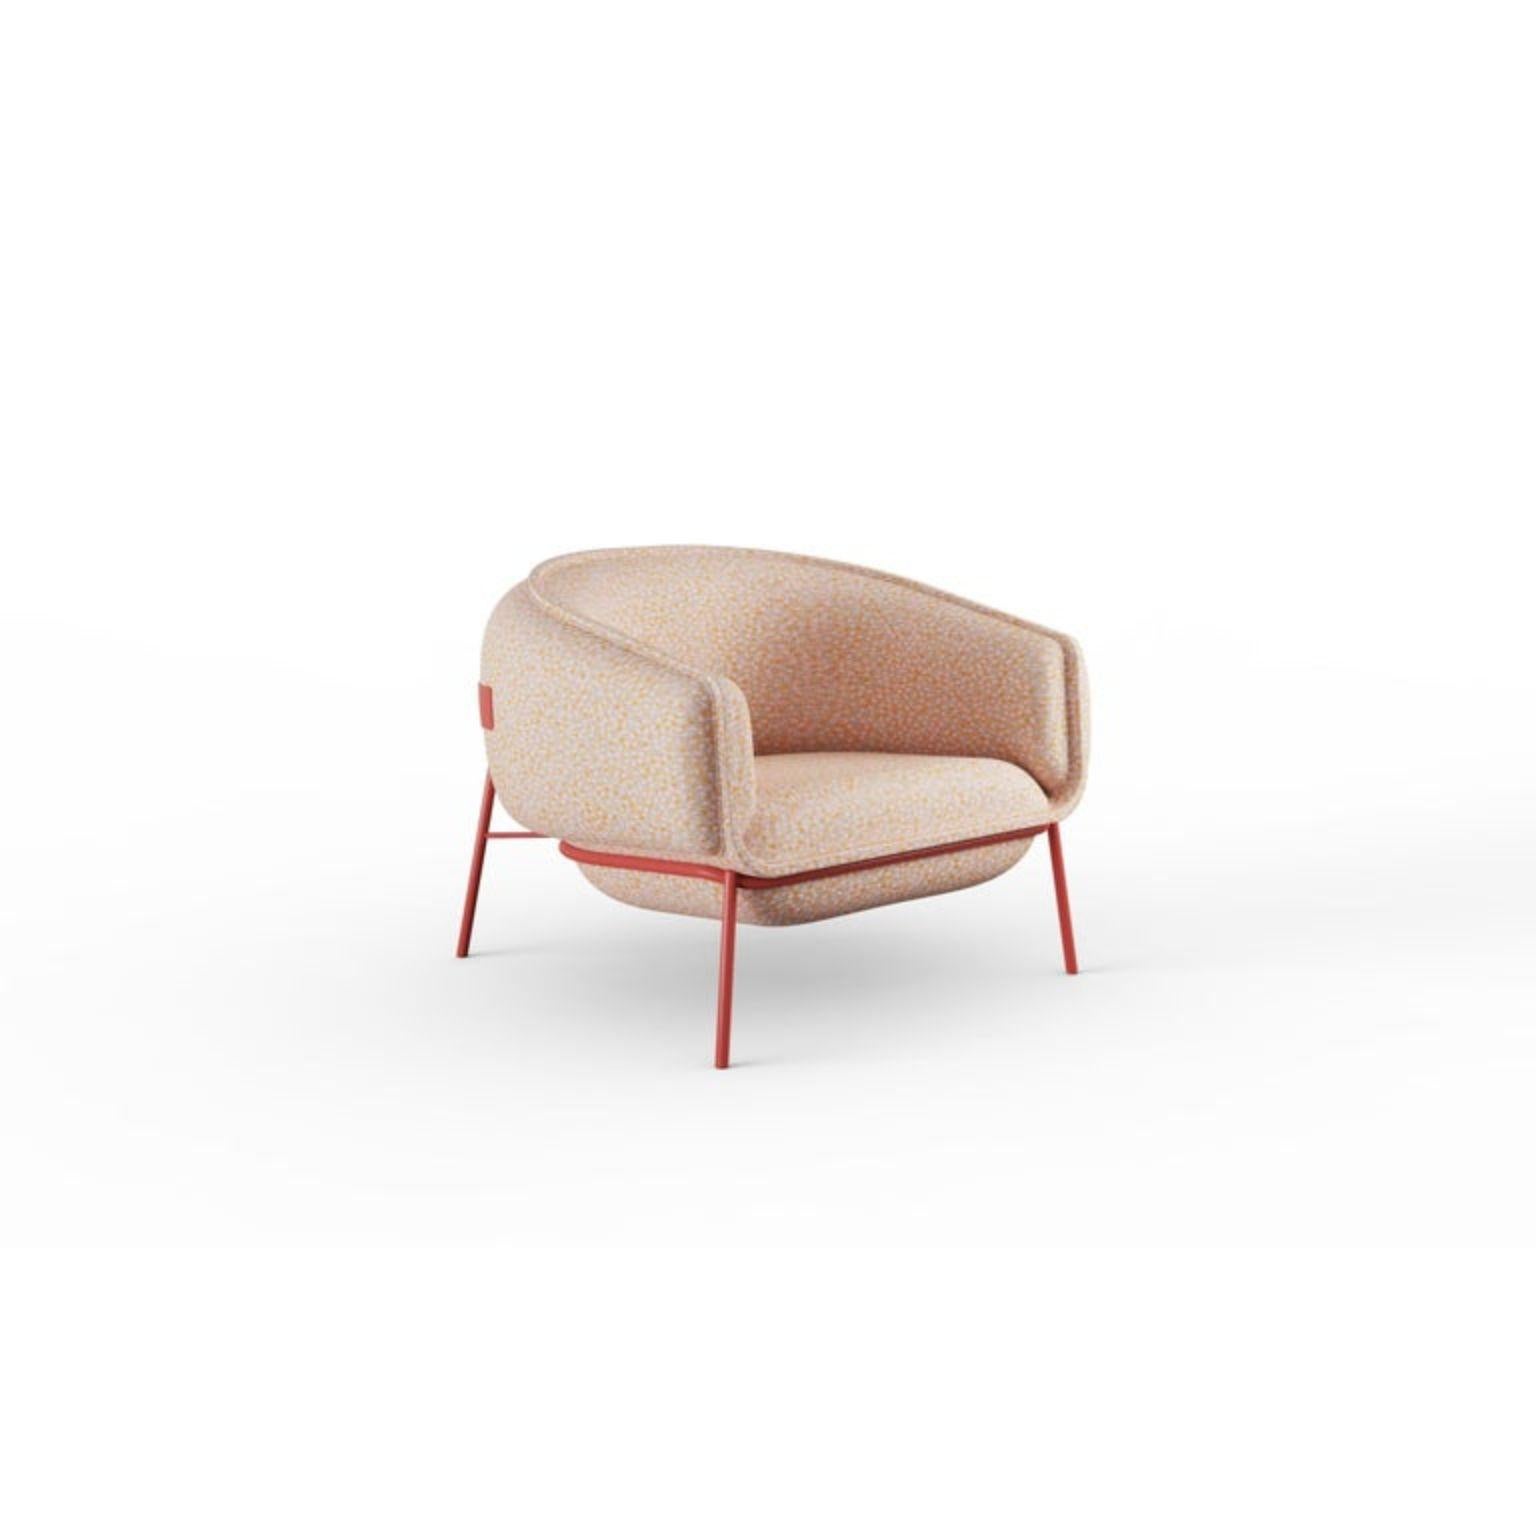 Contemporary fabric Blop armchair
Dimensions: D 78 x W 80 x H 75 cm
Seat height 44 cm
Materials: Top: fabric or leather
Feet: Lacquer metal - choose from metal samples.




      